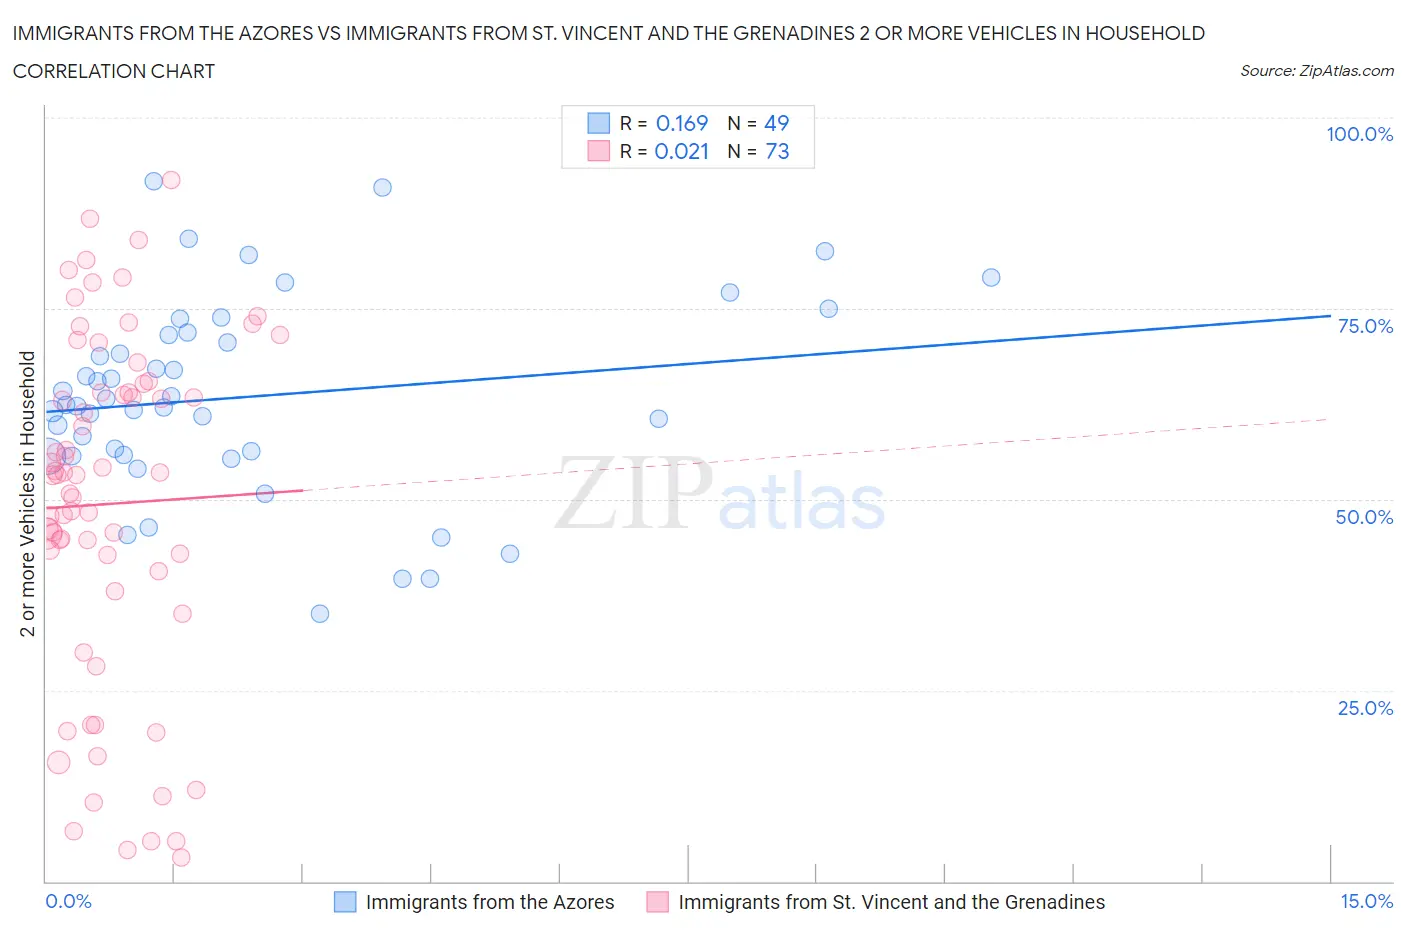 Immigrants from the Azores vs Immigrants from St. Vincent and the Grenadines 2 or more Vehicles in Household